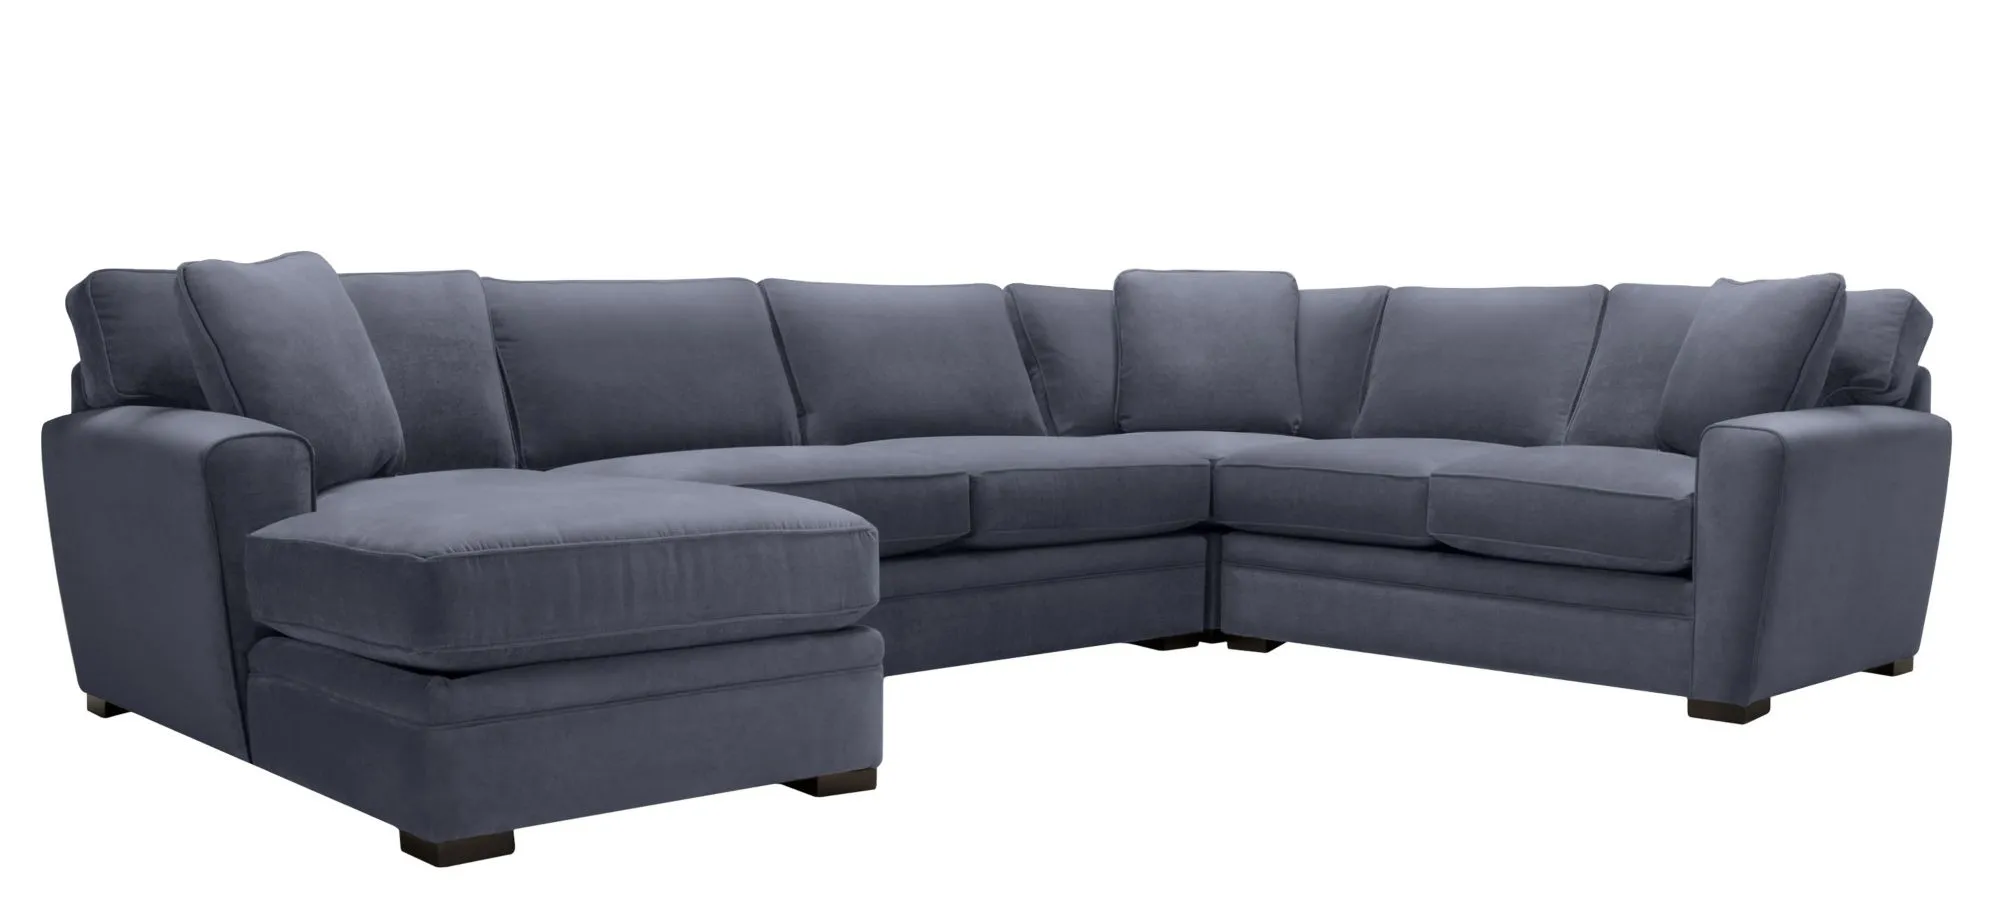 Artemis II 4-pc. Left Hand Facing Sectional Sofa in Gypsy Slate by Jonathan Louis